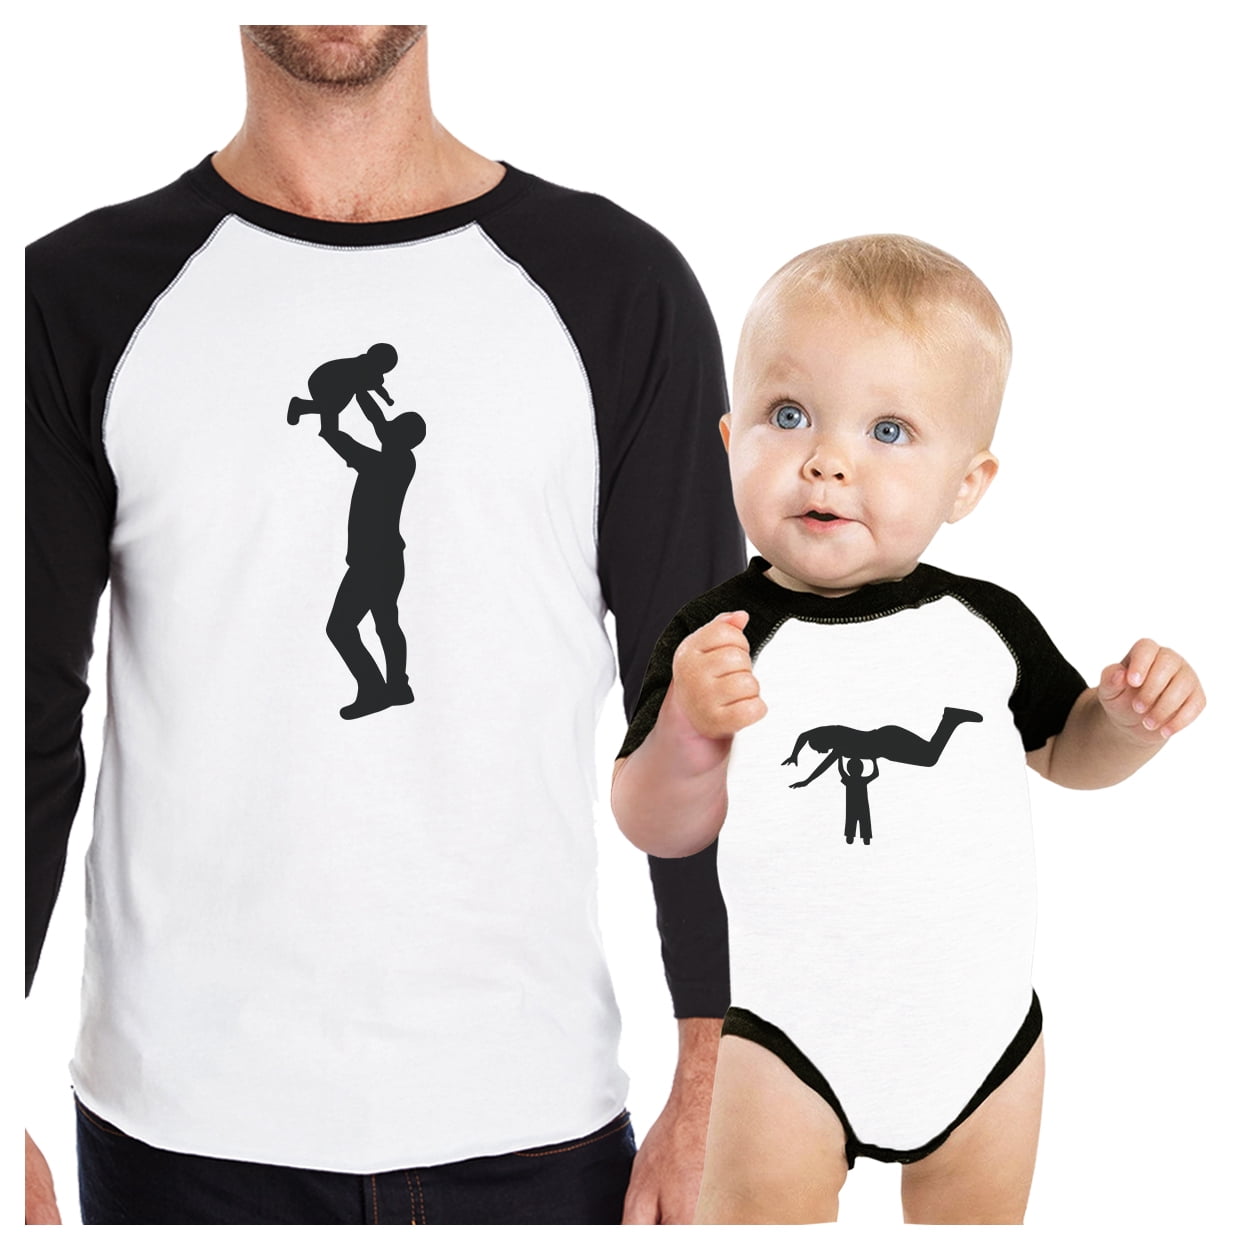 Best Daughter and Dad in The Galaxy Mens T Shirt & Baby T-Shirt Matching Father Baby Gift Set